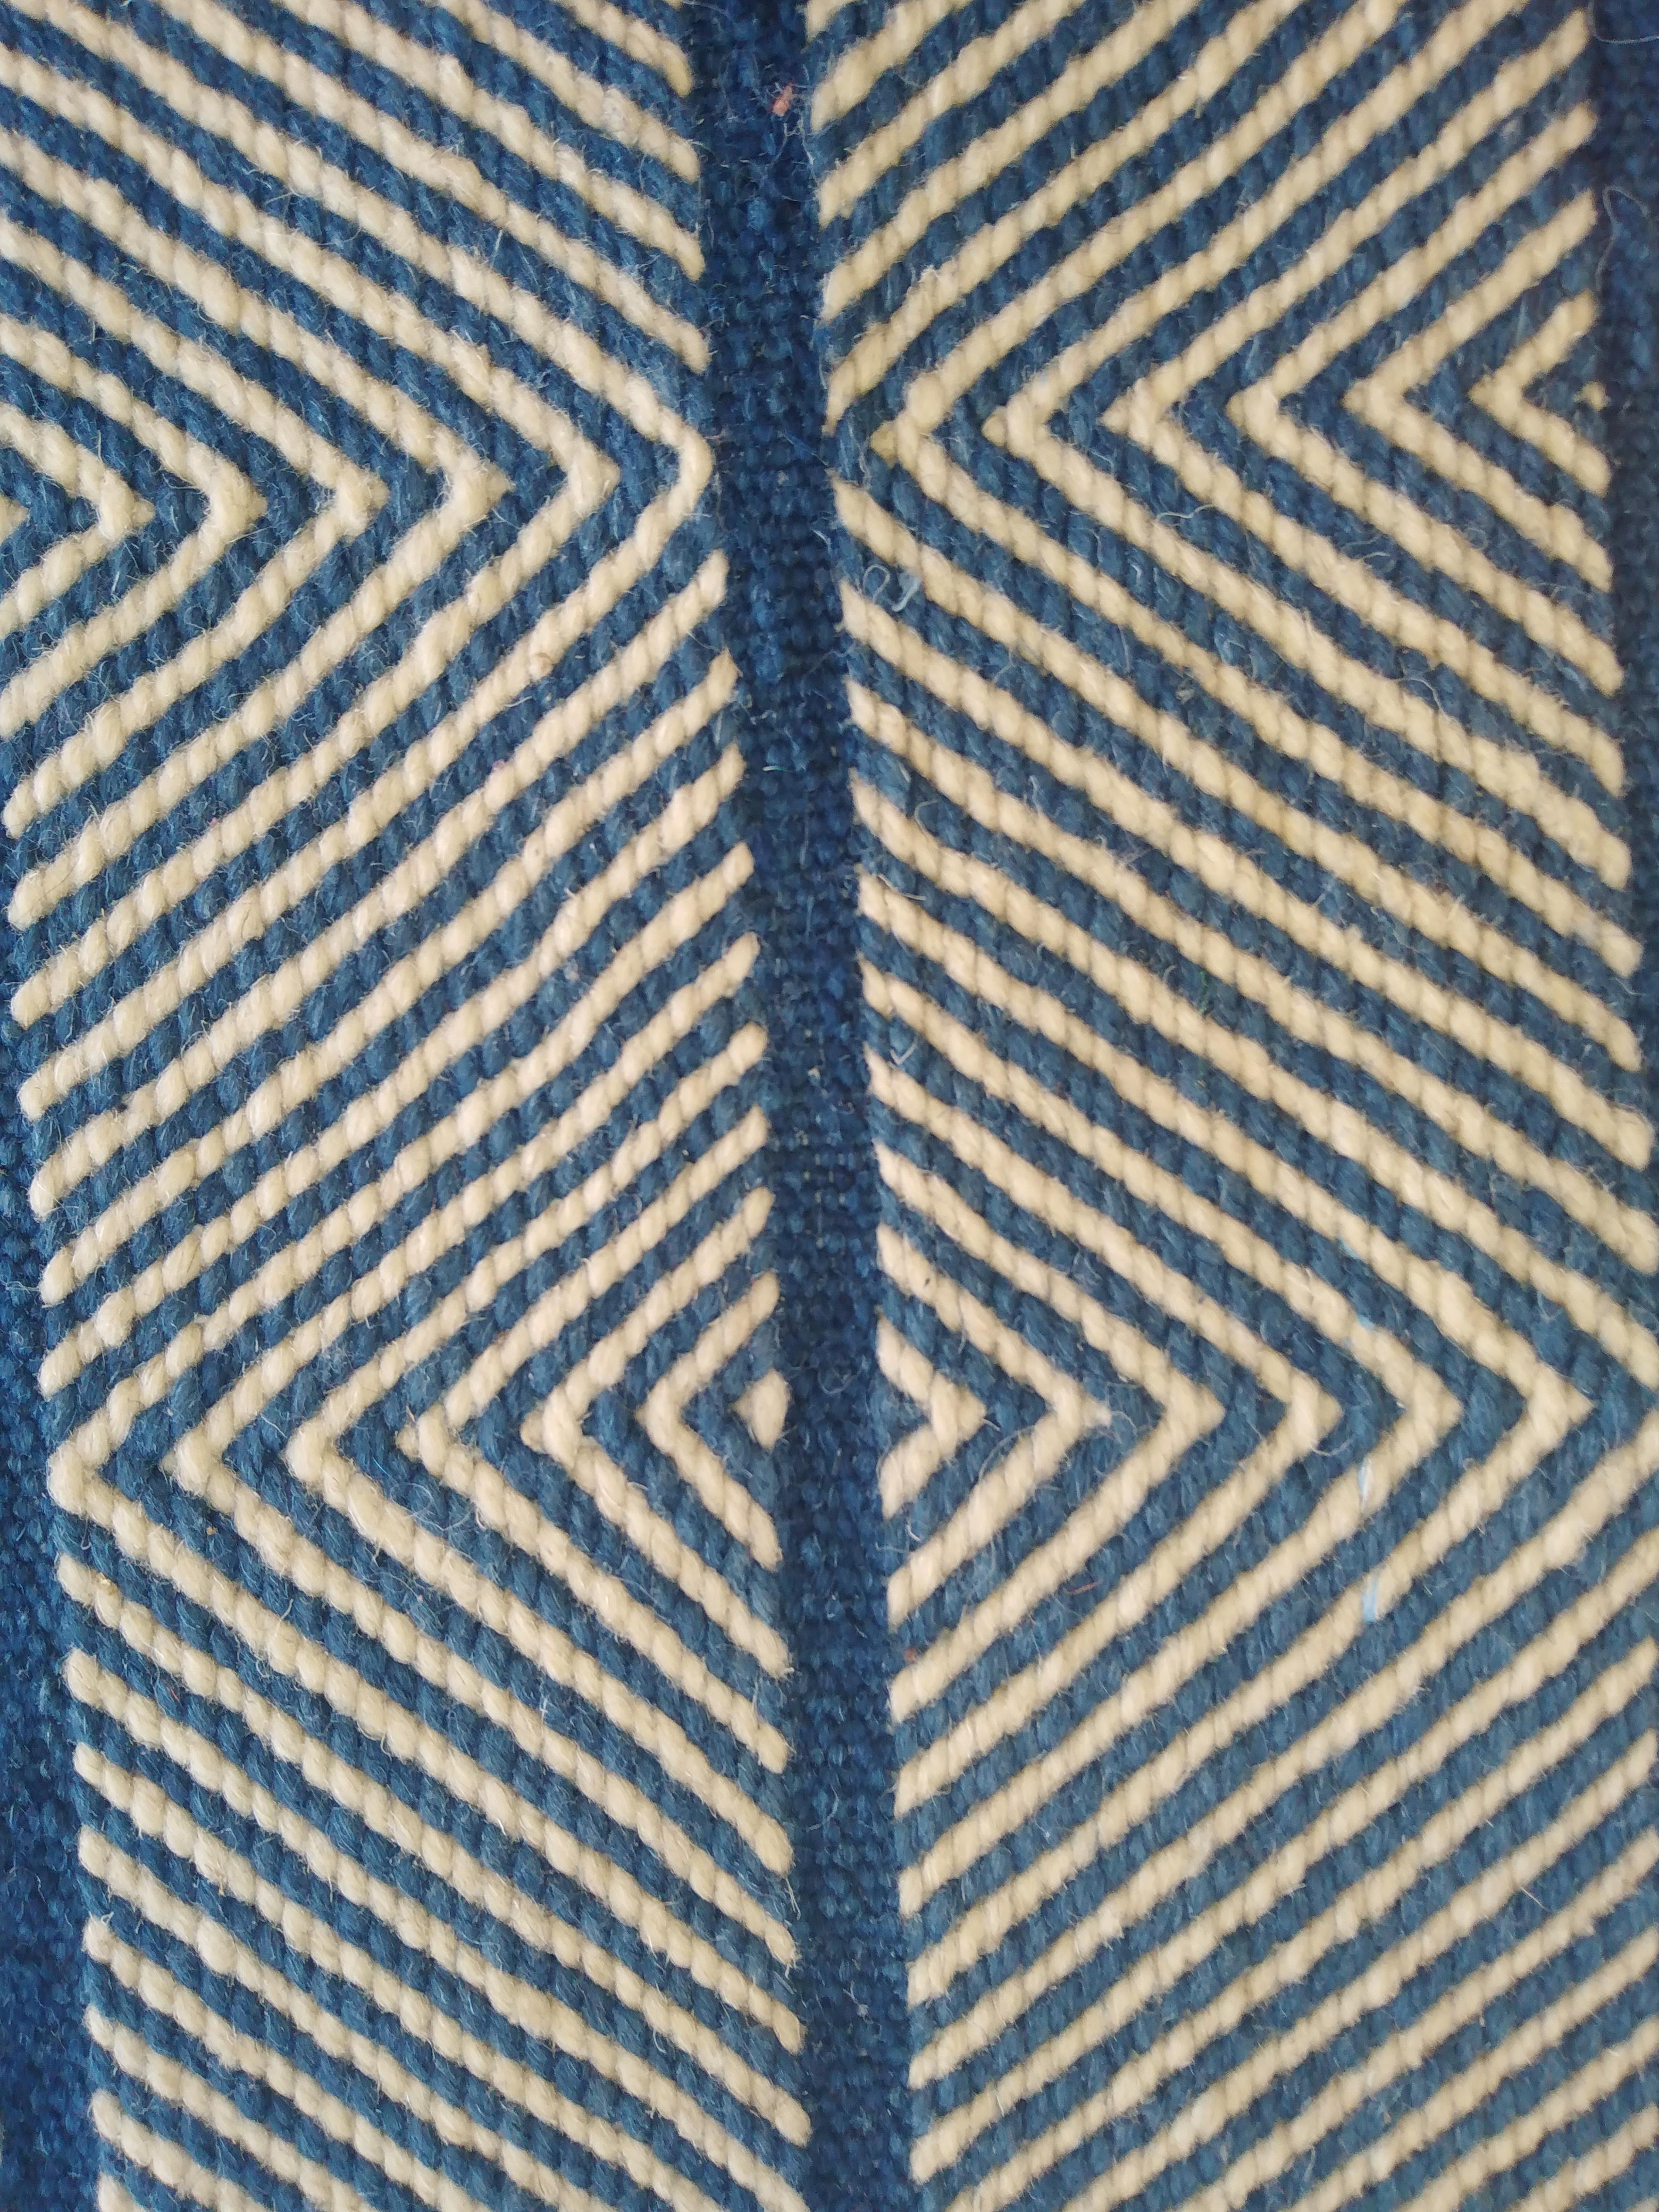 Moroccan Wool Throw Rug Hand Embroidered Berber - Natural Blue White Tribal For Sale 3